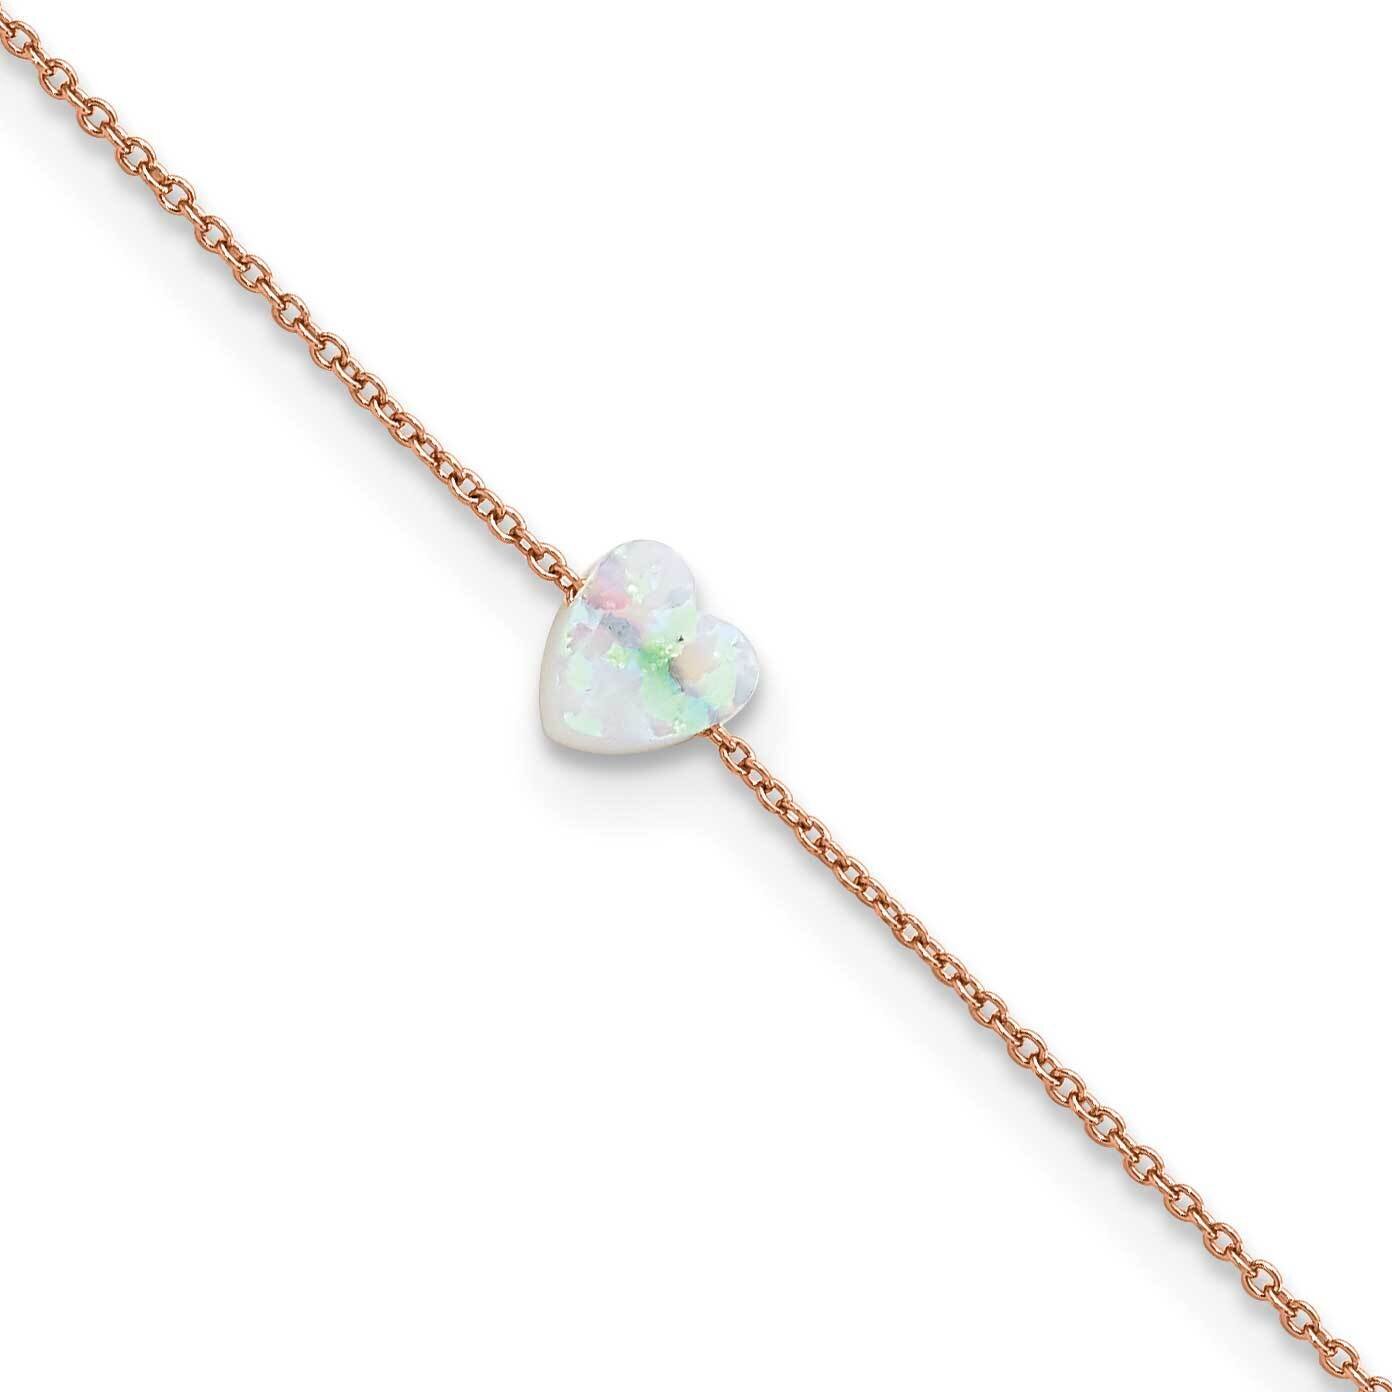 White Cr. Opal Heart 9 Inch Plus 2 In Extender Anklet Sterling Silver Rose-Tone QG5746-9